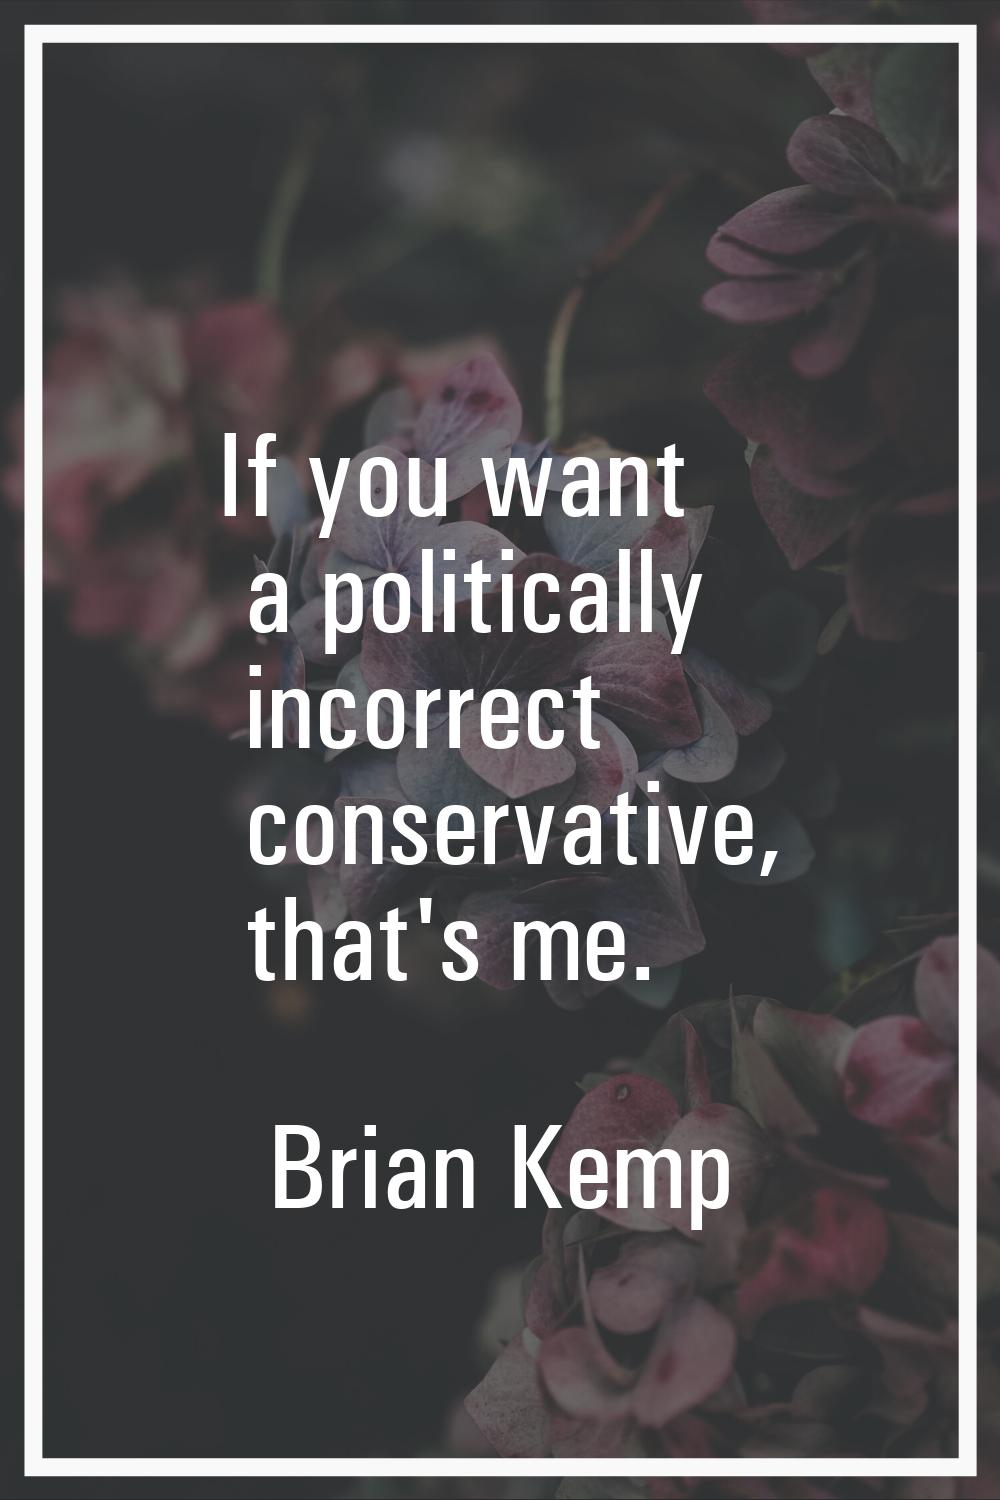 If you want a politically incorrect conservative, that's me.